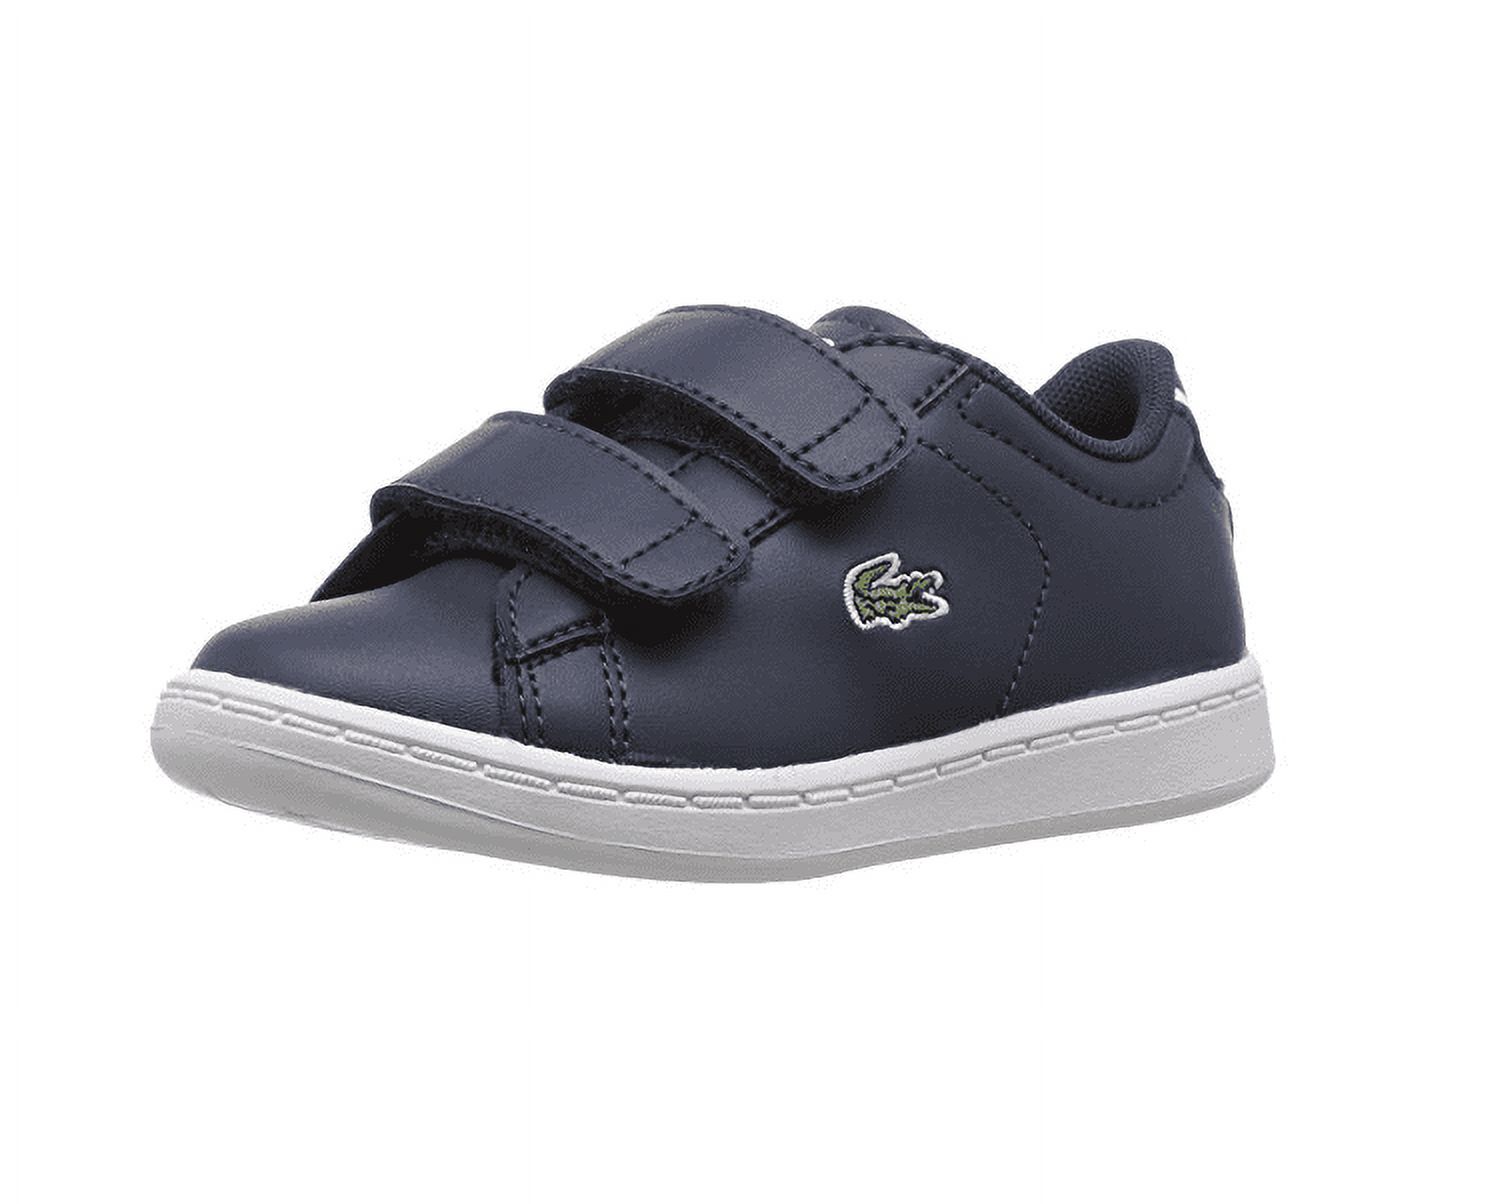 Lacoste Toddlers Carnaby Evo 317 3 Spi Casual Shoe Sneaker, 2 Color Options - image 1 of 1